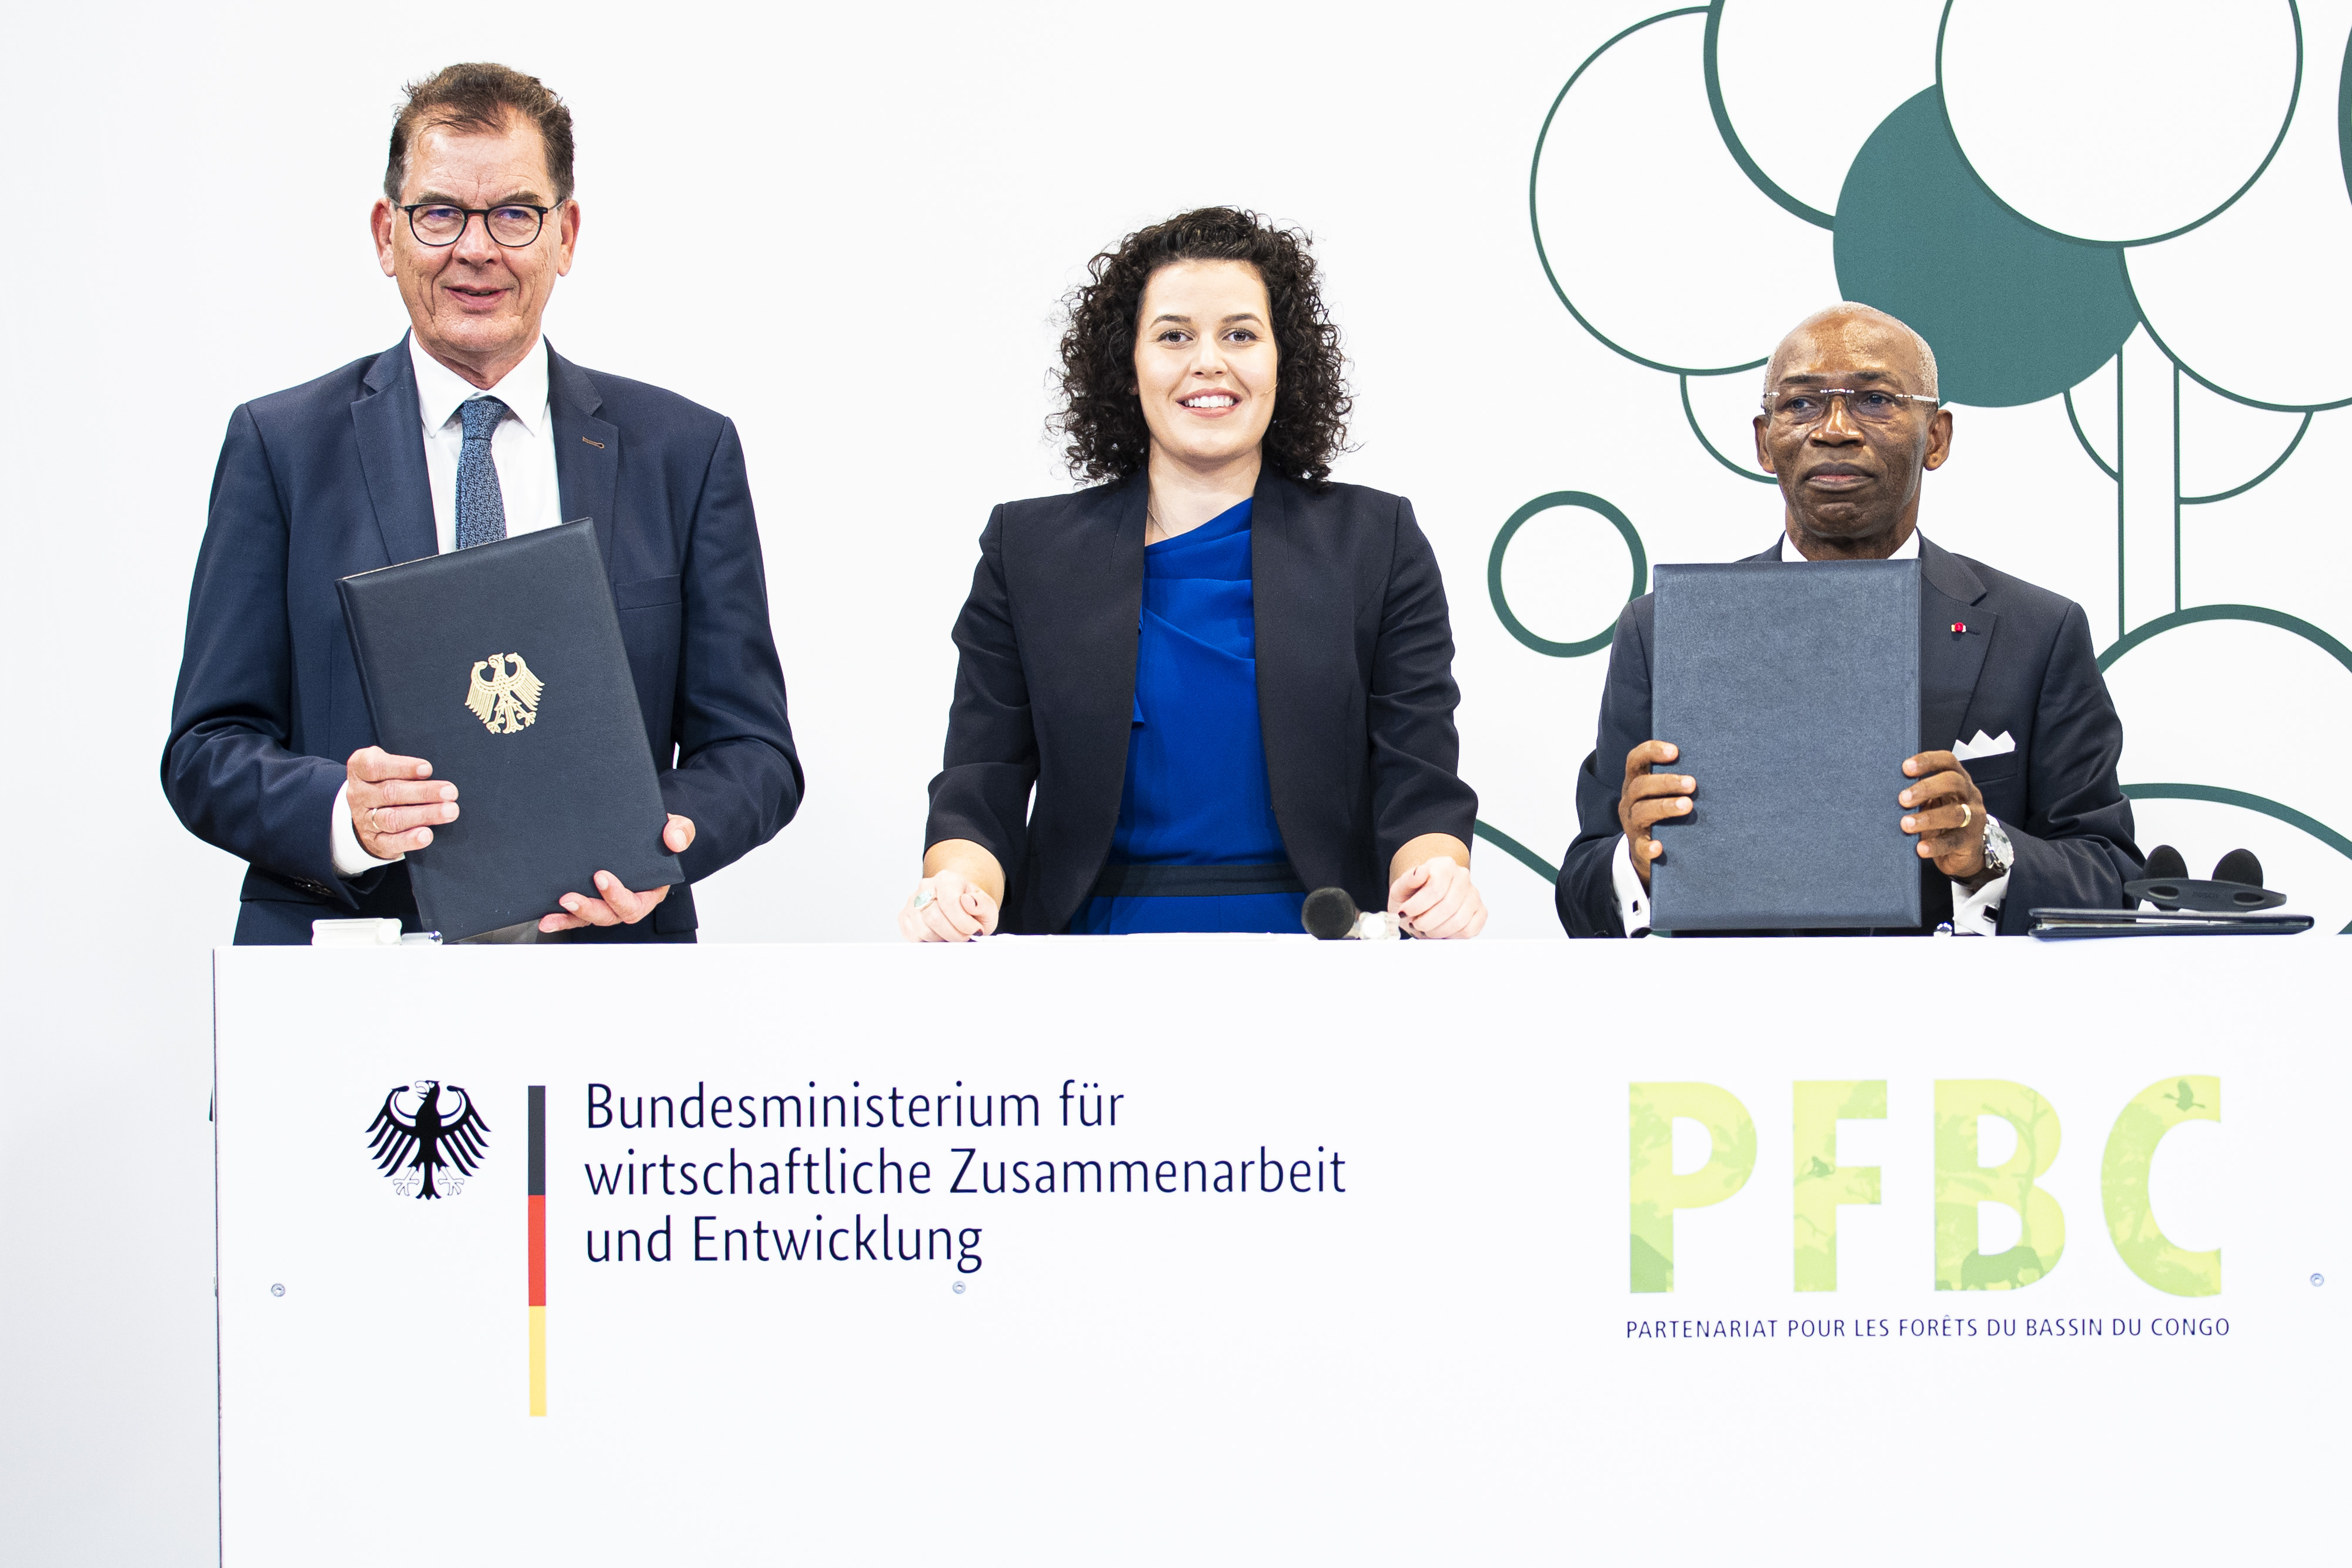 German Development Minister Gerd Müller (left) and Jules Doret Ndongo, Minister of Forestry of Cameroon and President of the Central African Forestry Commission (COMIFAC) (right), after signing the Declaration on the Protection of the Congo Basin Rainforest on 7 September 2021 with moderator Katie Gallus 